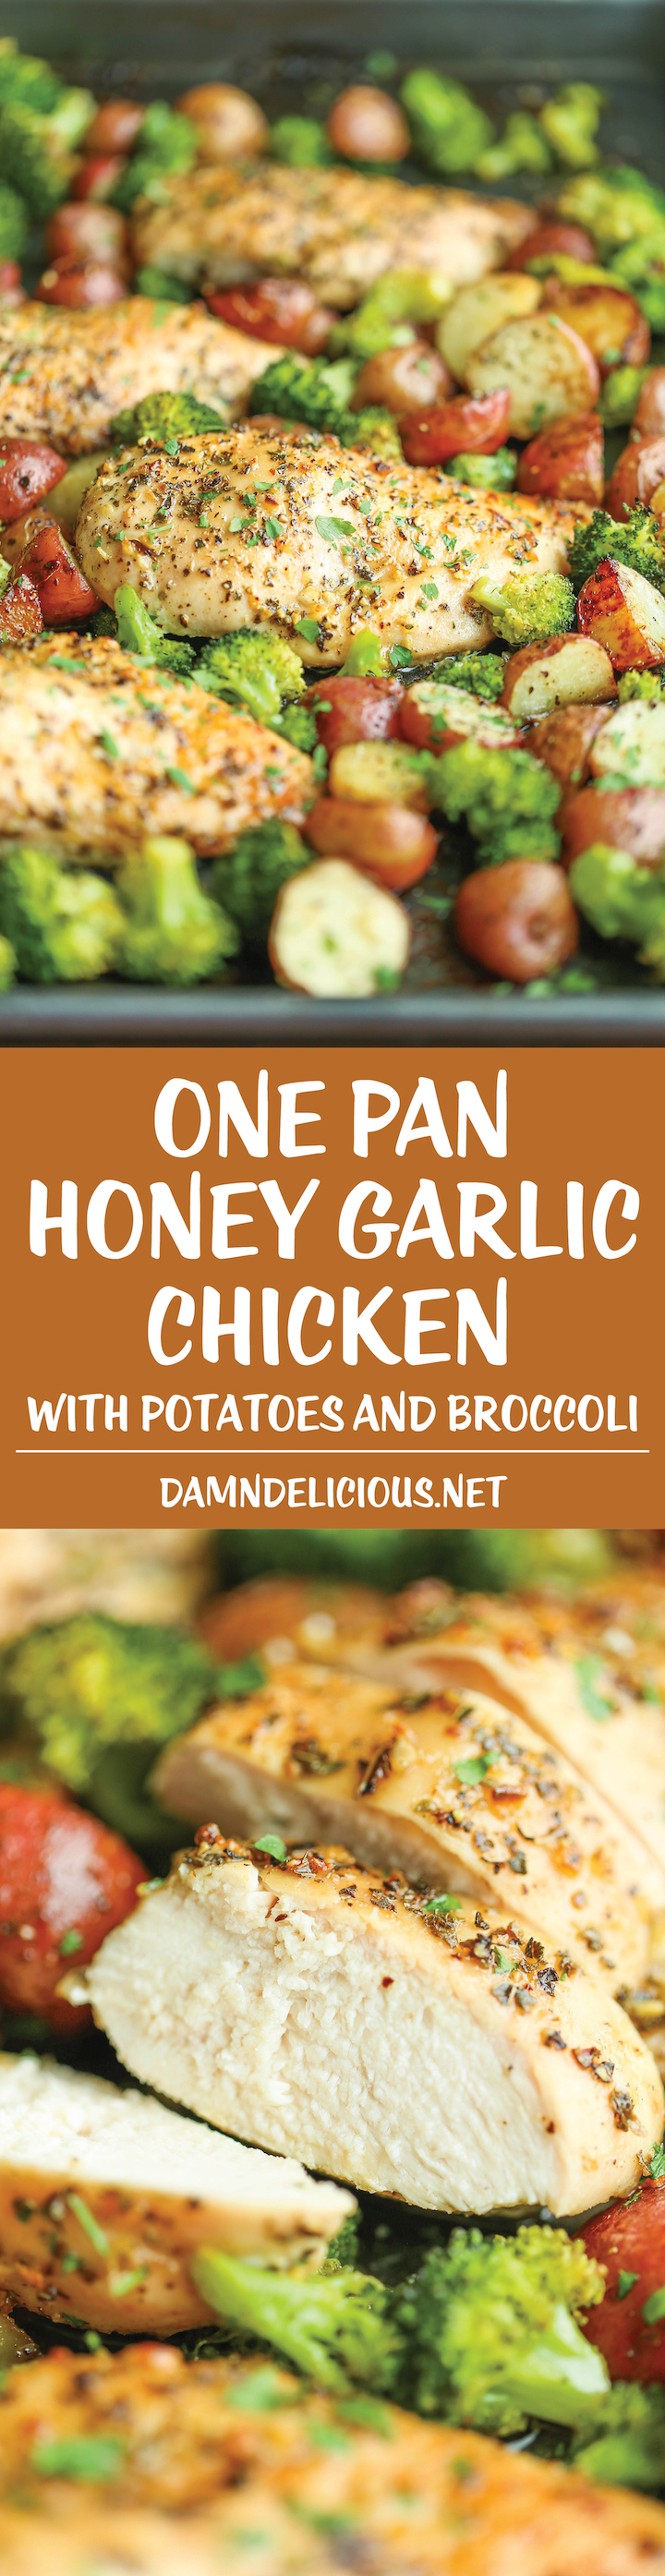 One Pan Honey Garlic Chicken and Veggies - Tender, juicy chicken breasts baked to perfection with potatoes and broccoli. All cooked on a single pan! EASY!